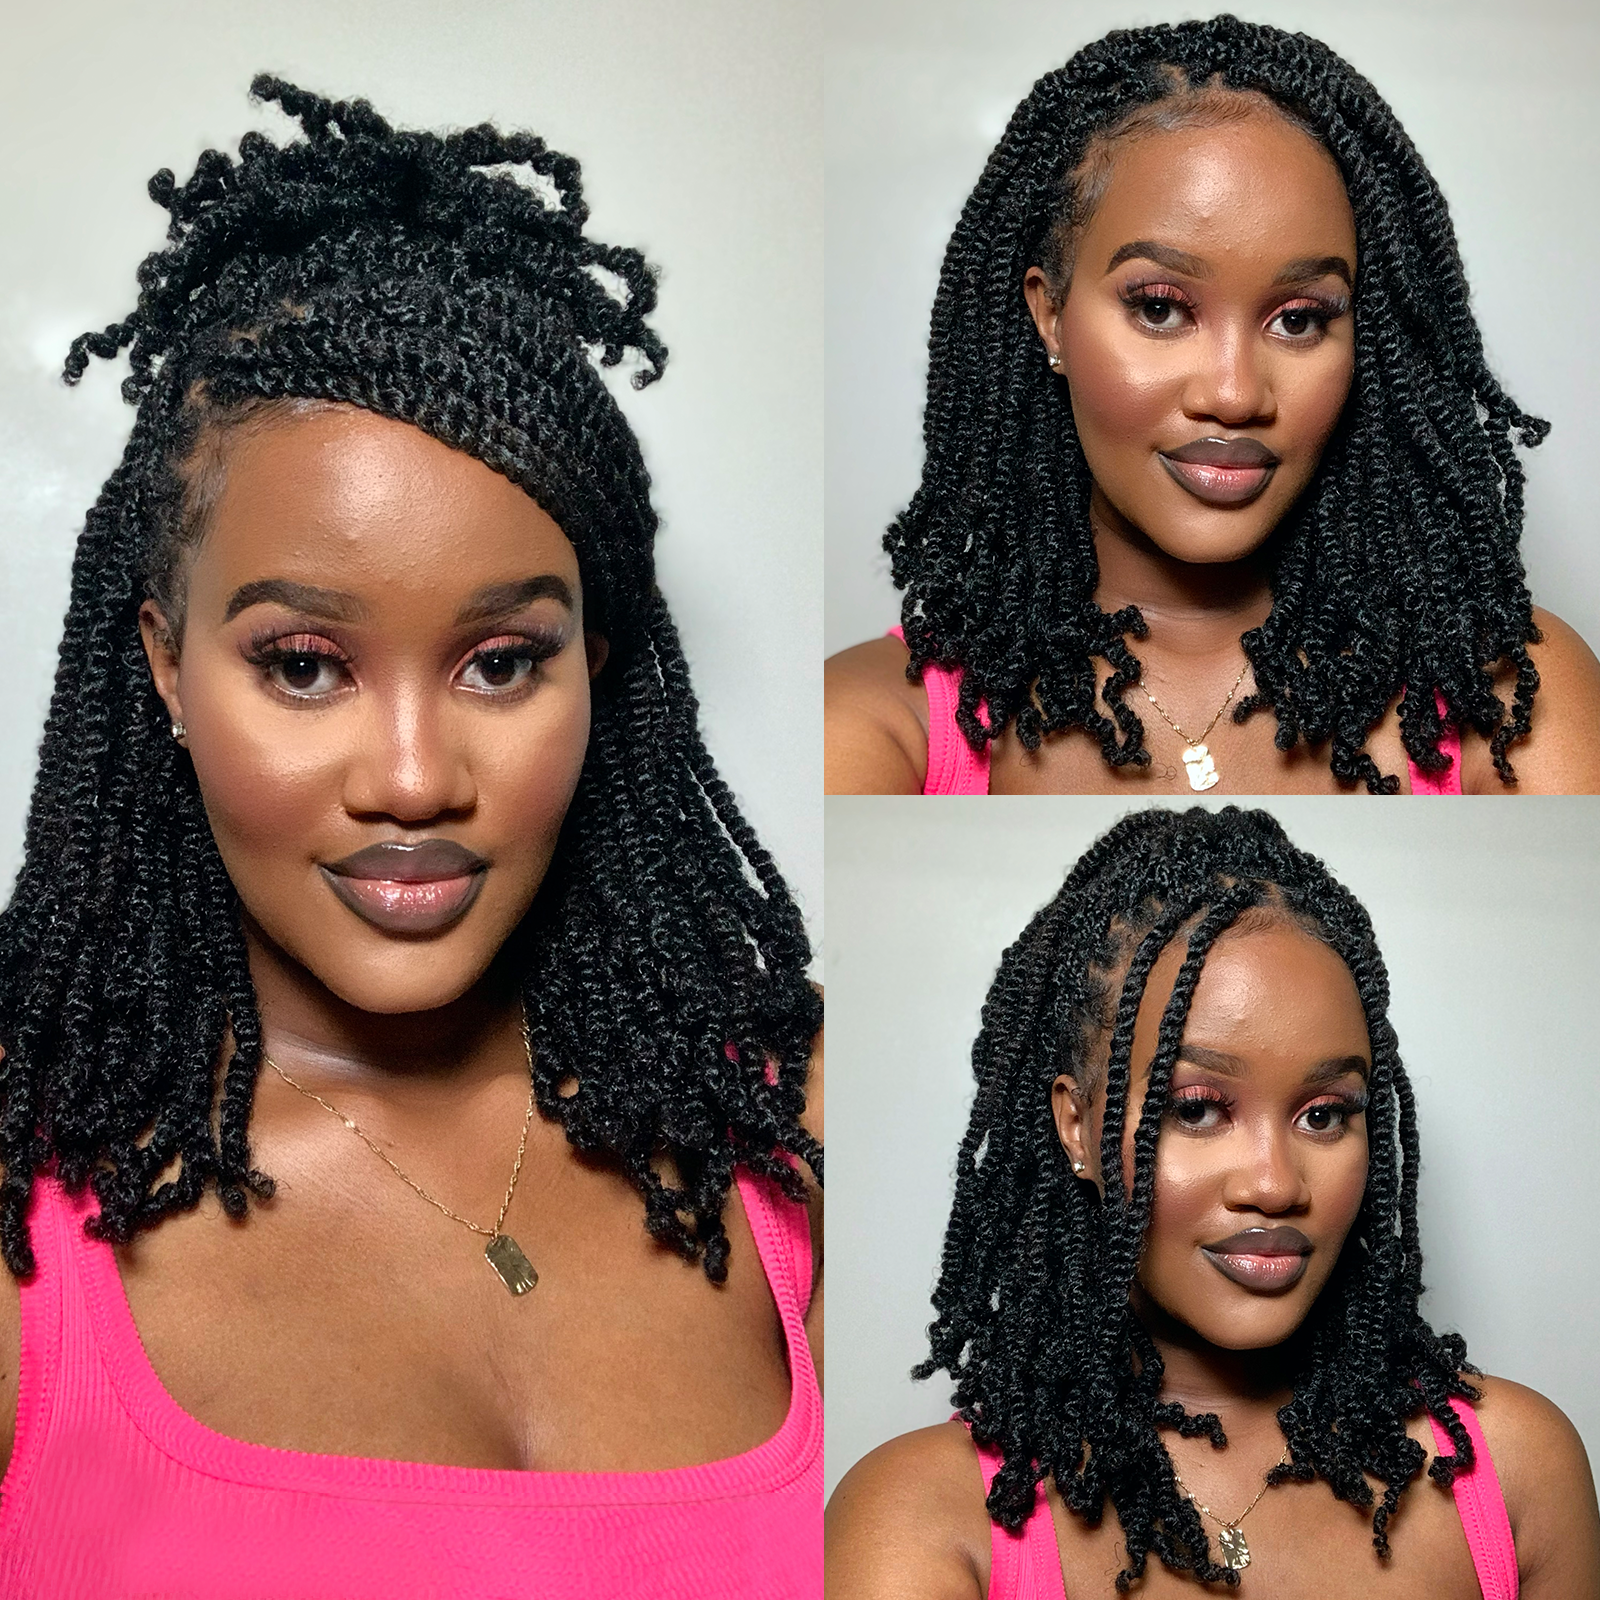 Springy Afro Twist Hair 18